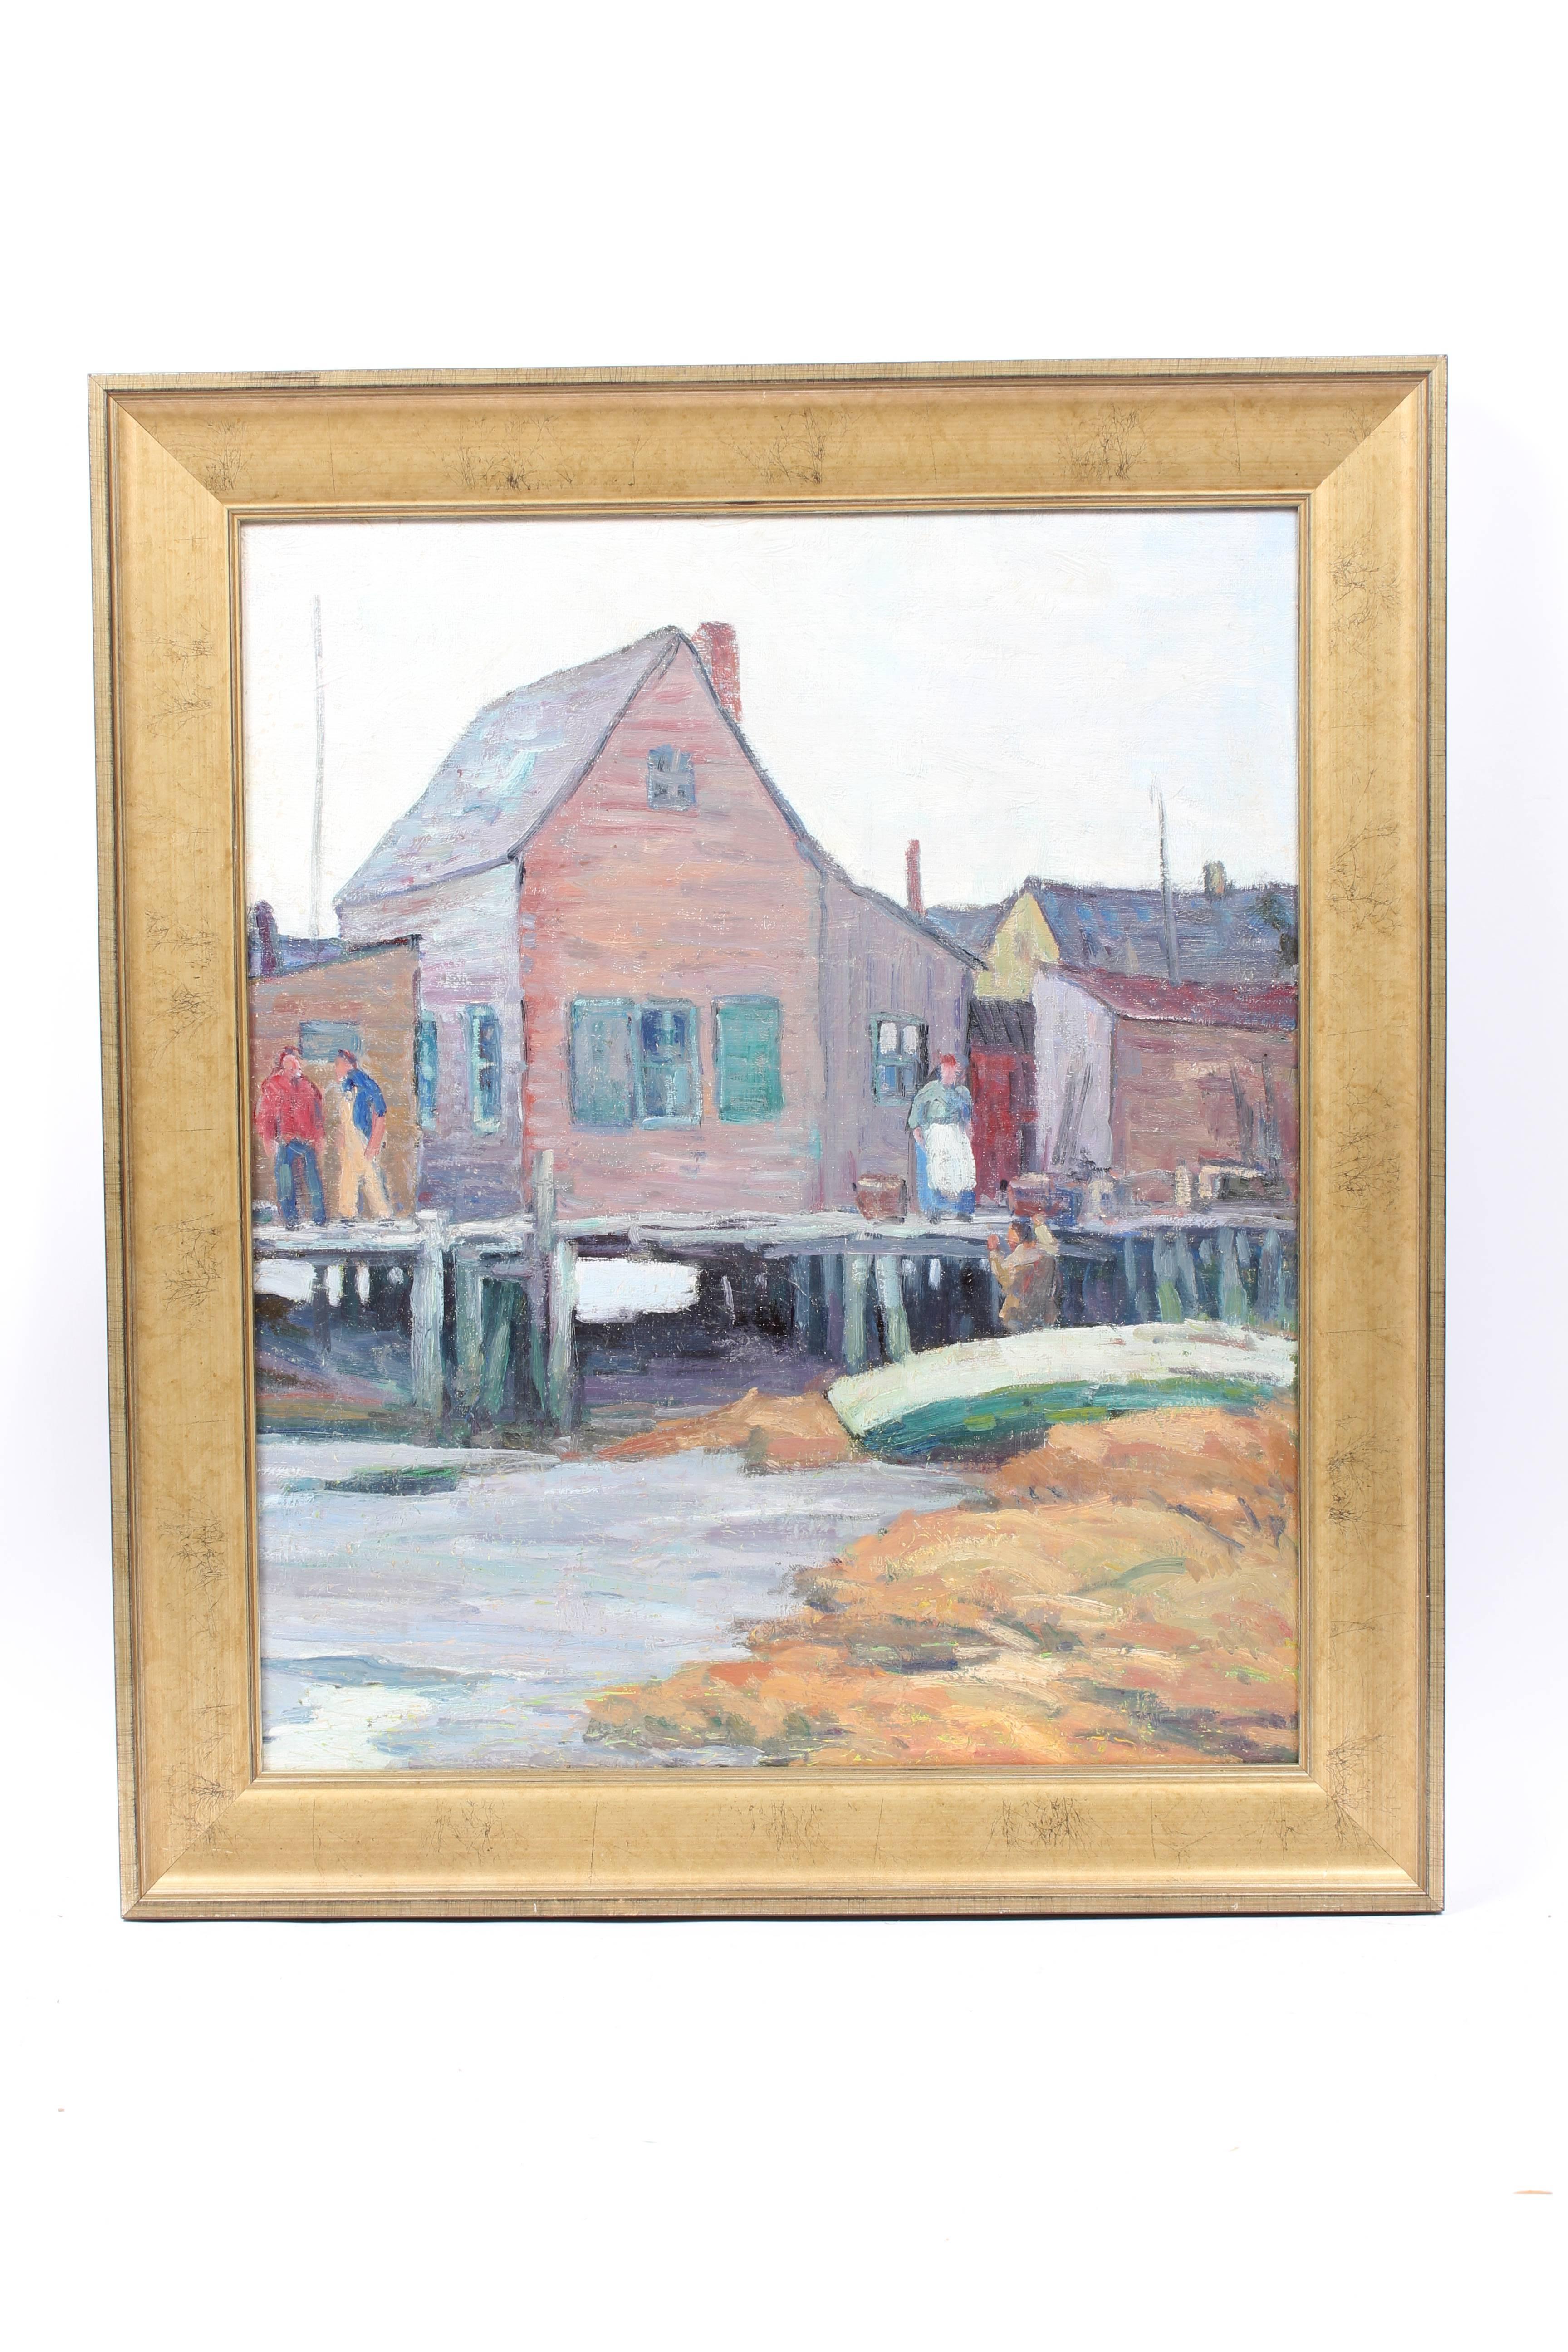 Provincetown Fishing Pier - Painting by George Renouard